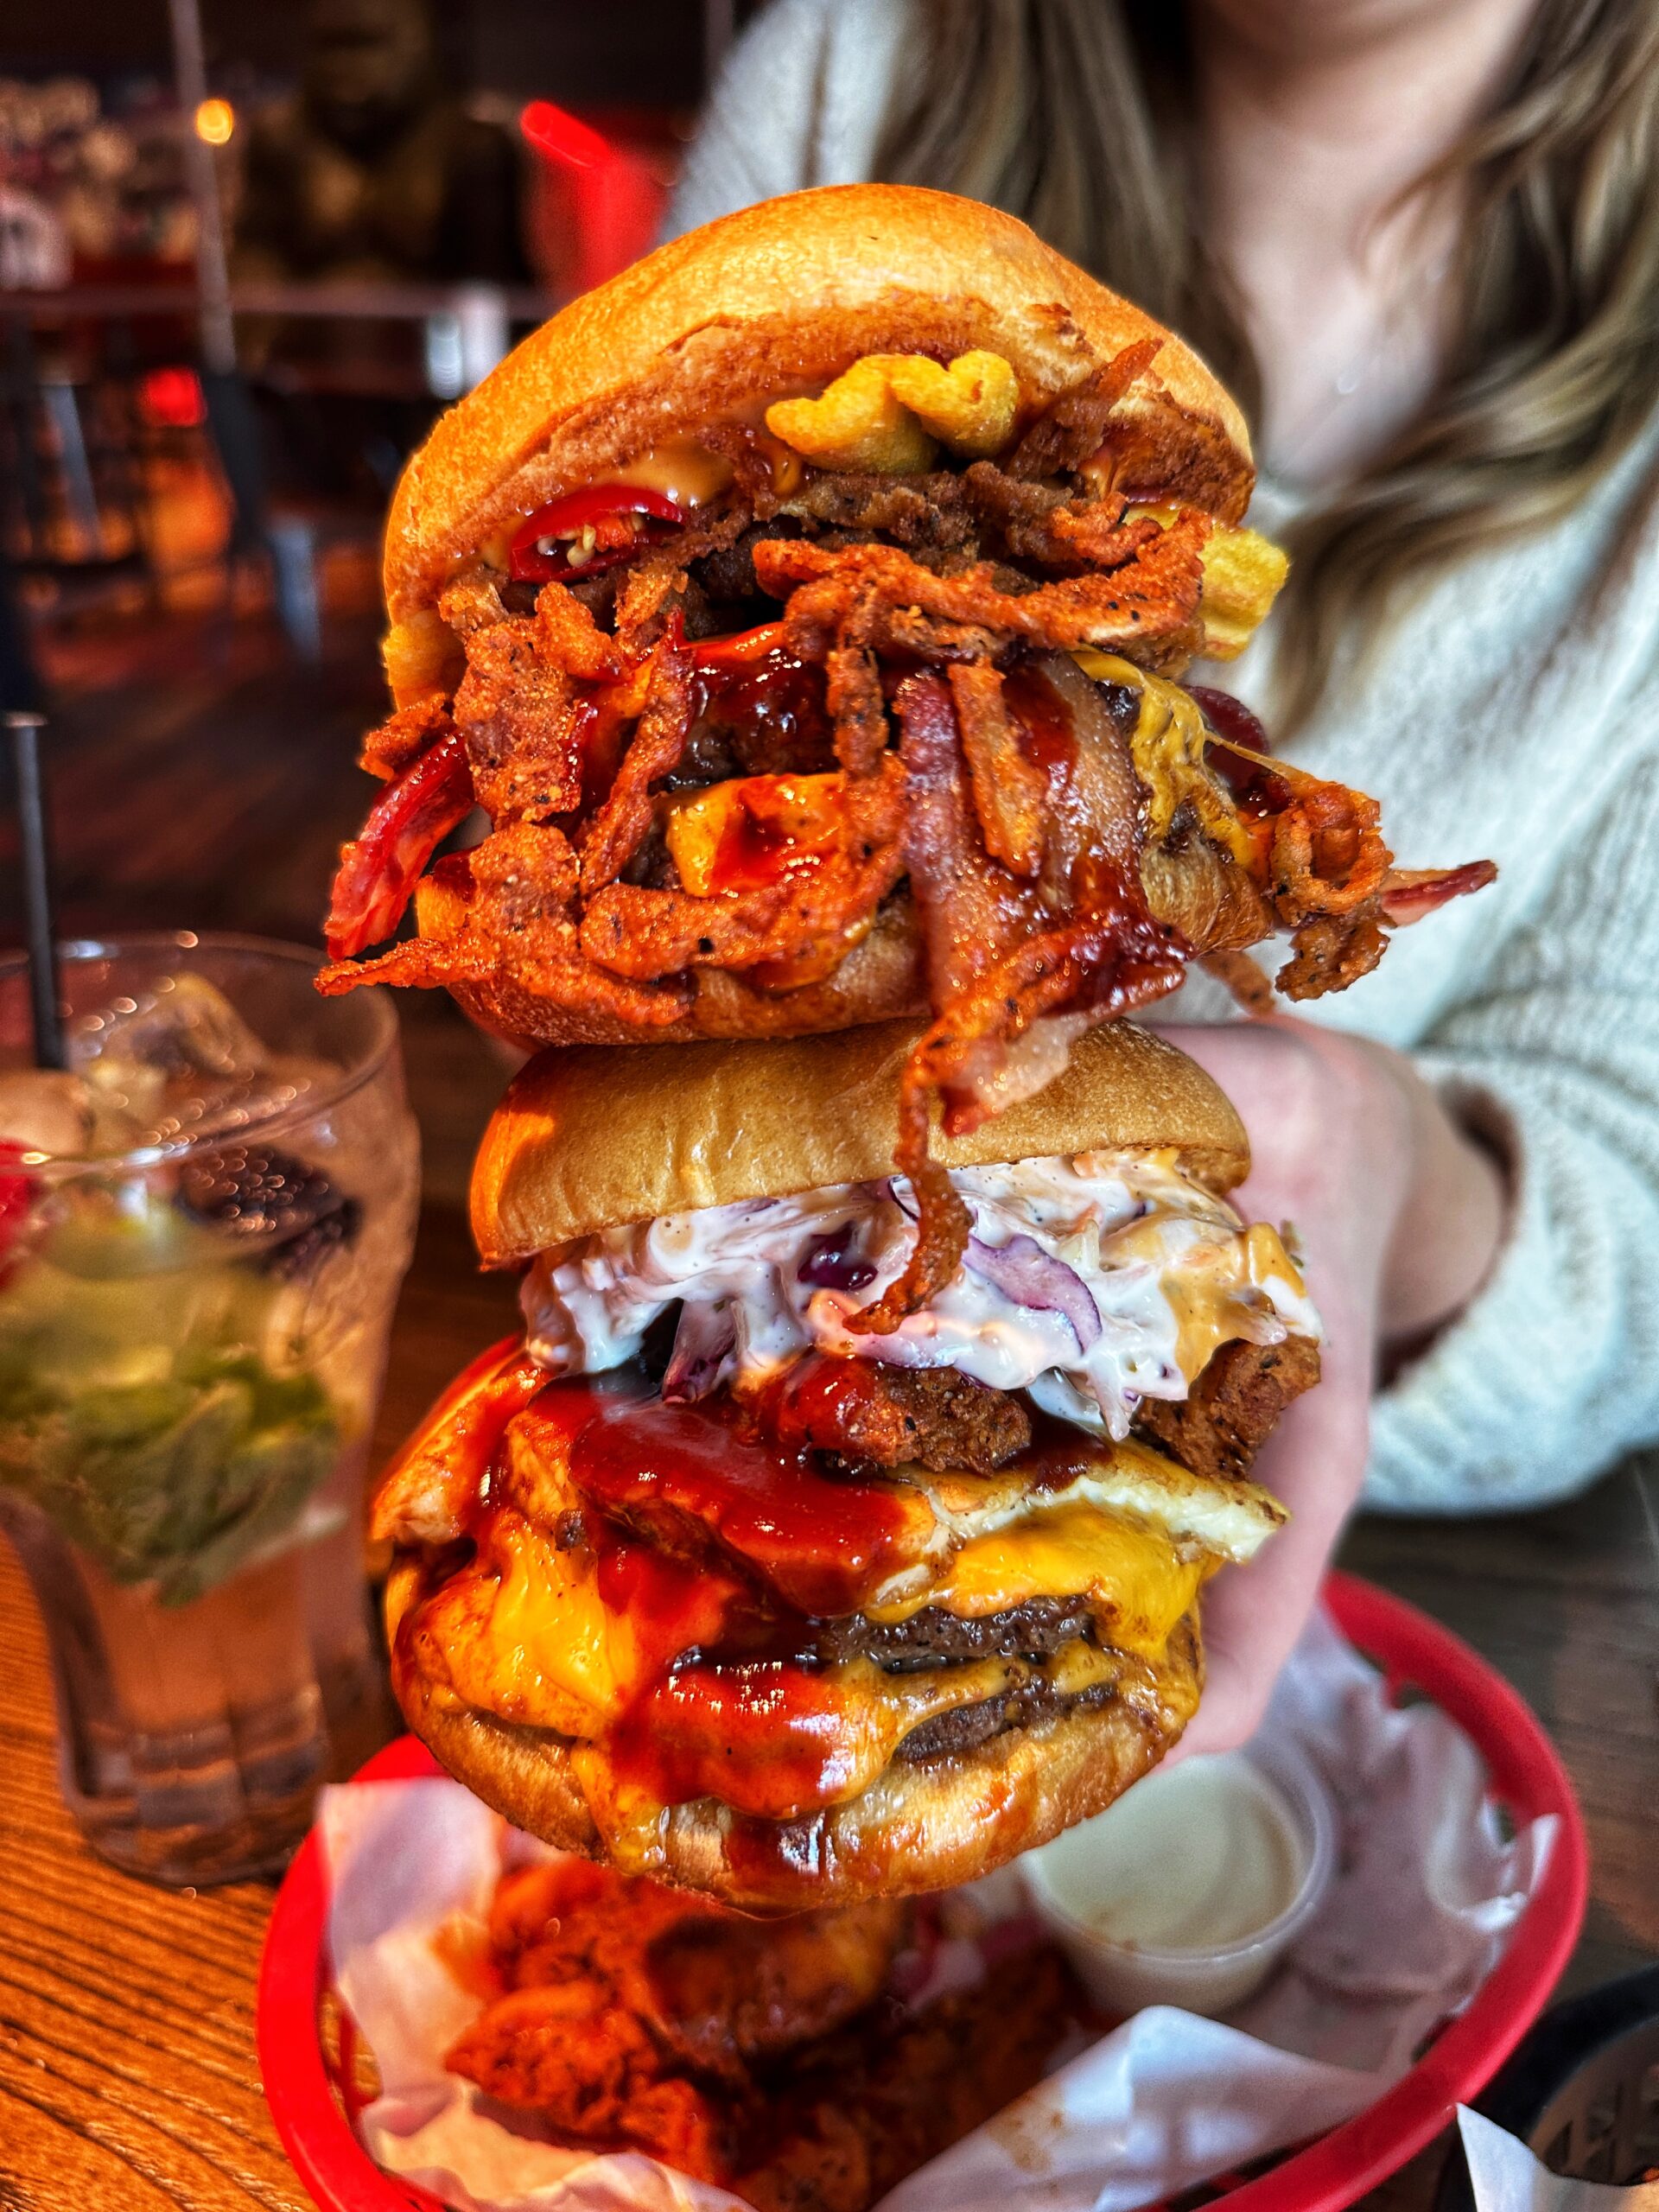 Almost Famous in Manchester has also confirmed its January offer